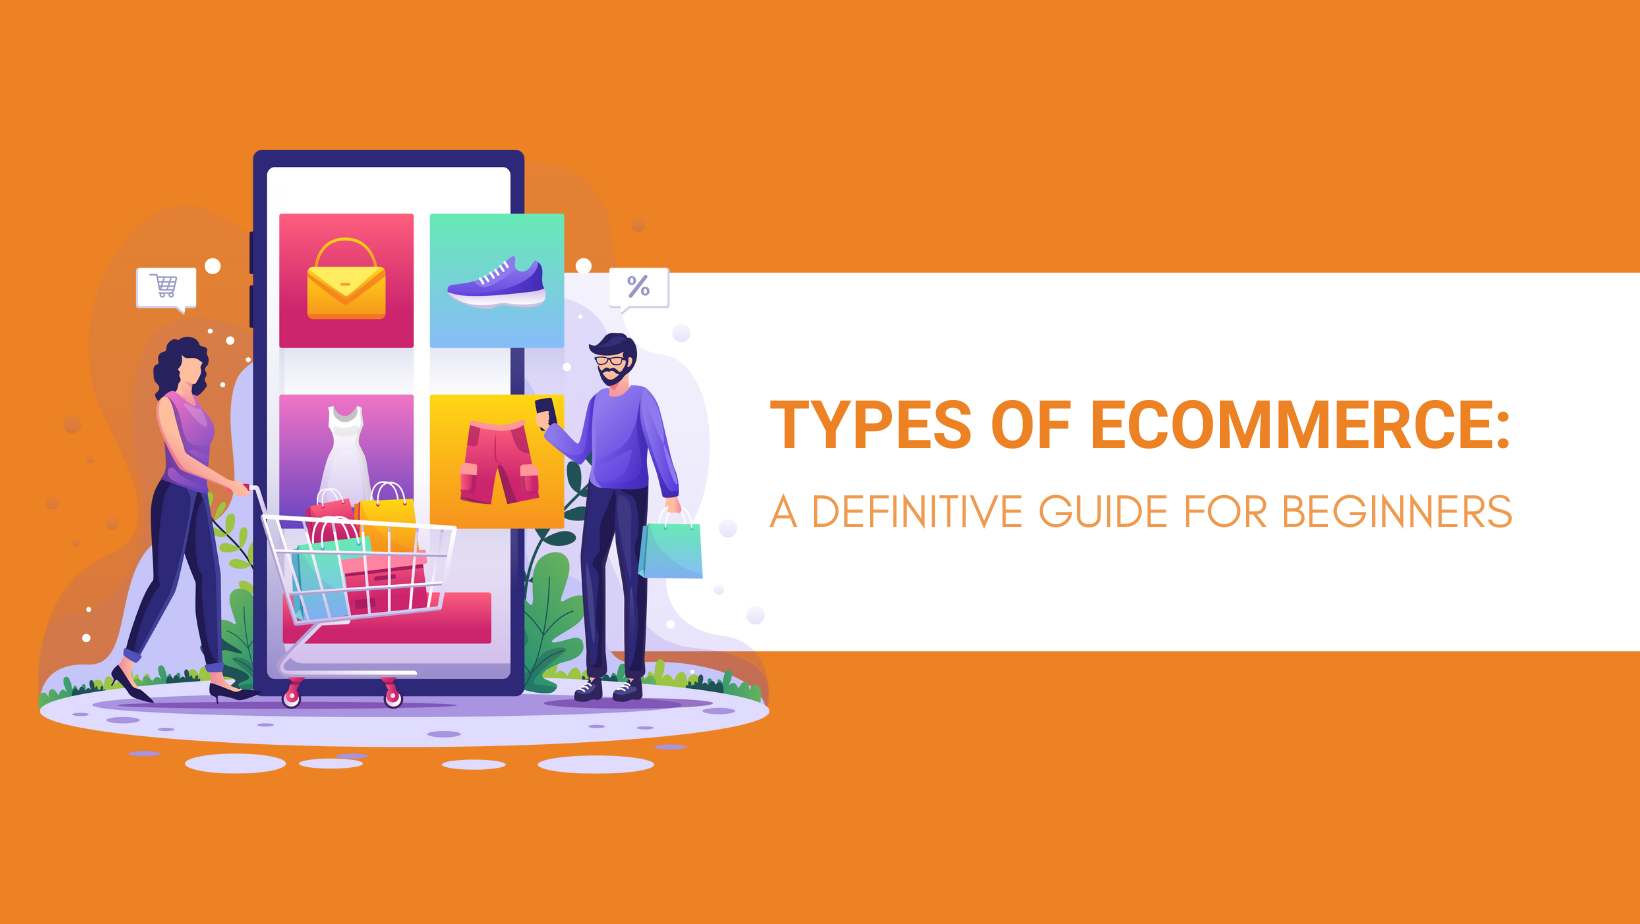 TYPES OF ECOMMERCE A DEFINITIVE GUIDE FOR BEGINNERS